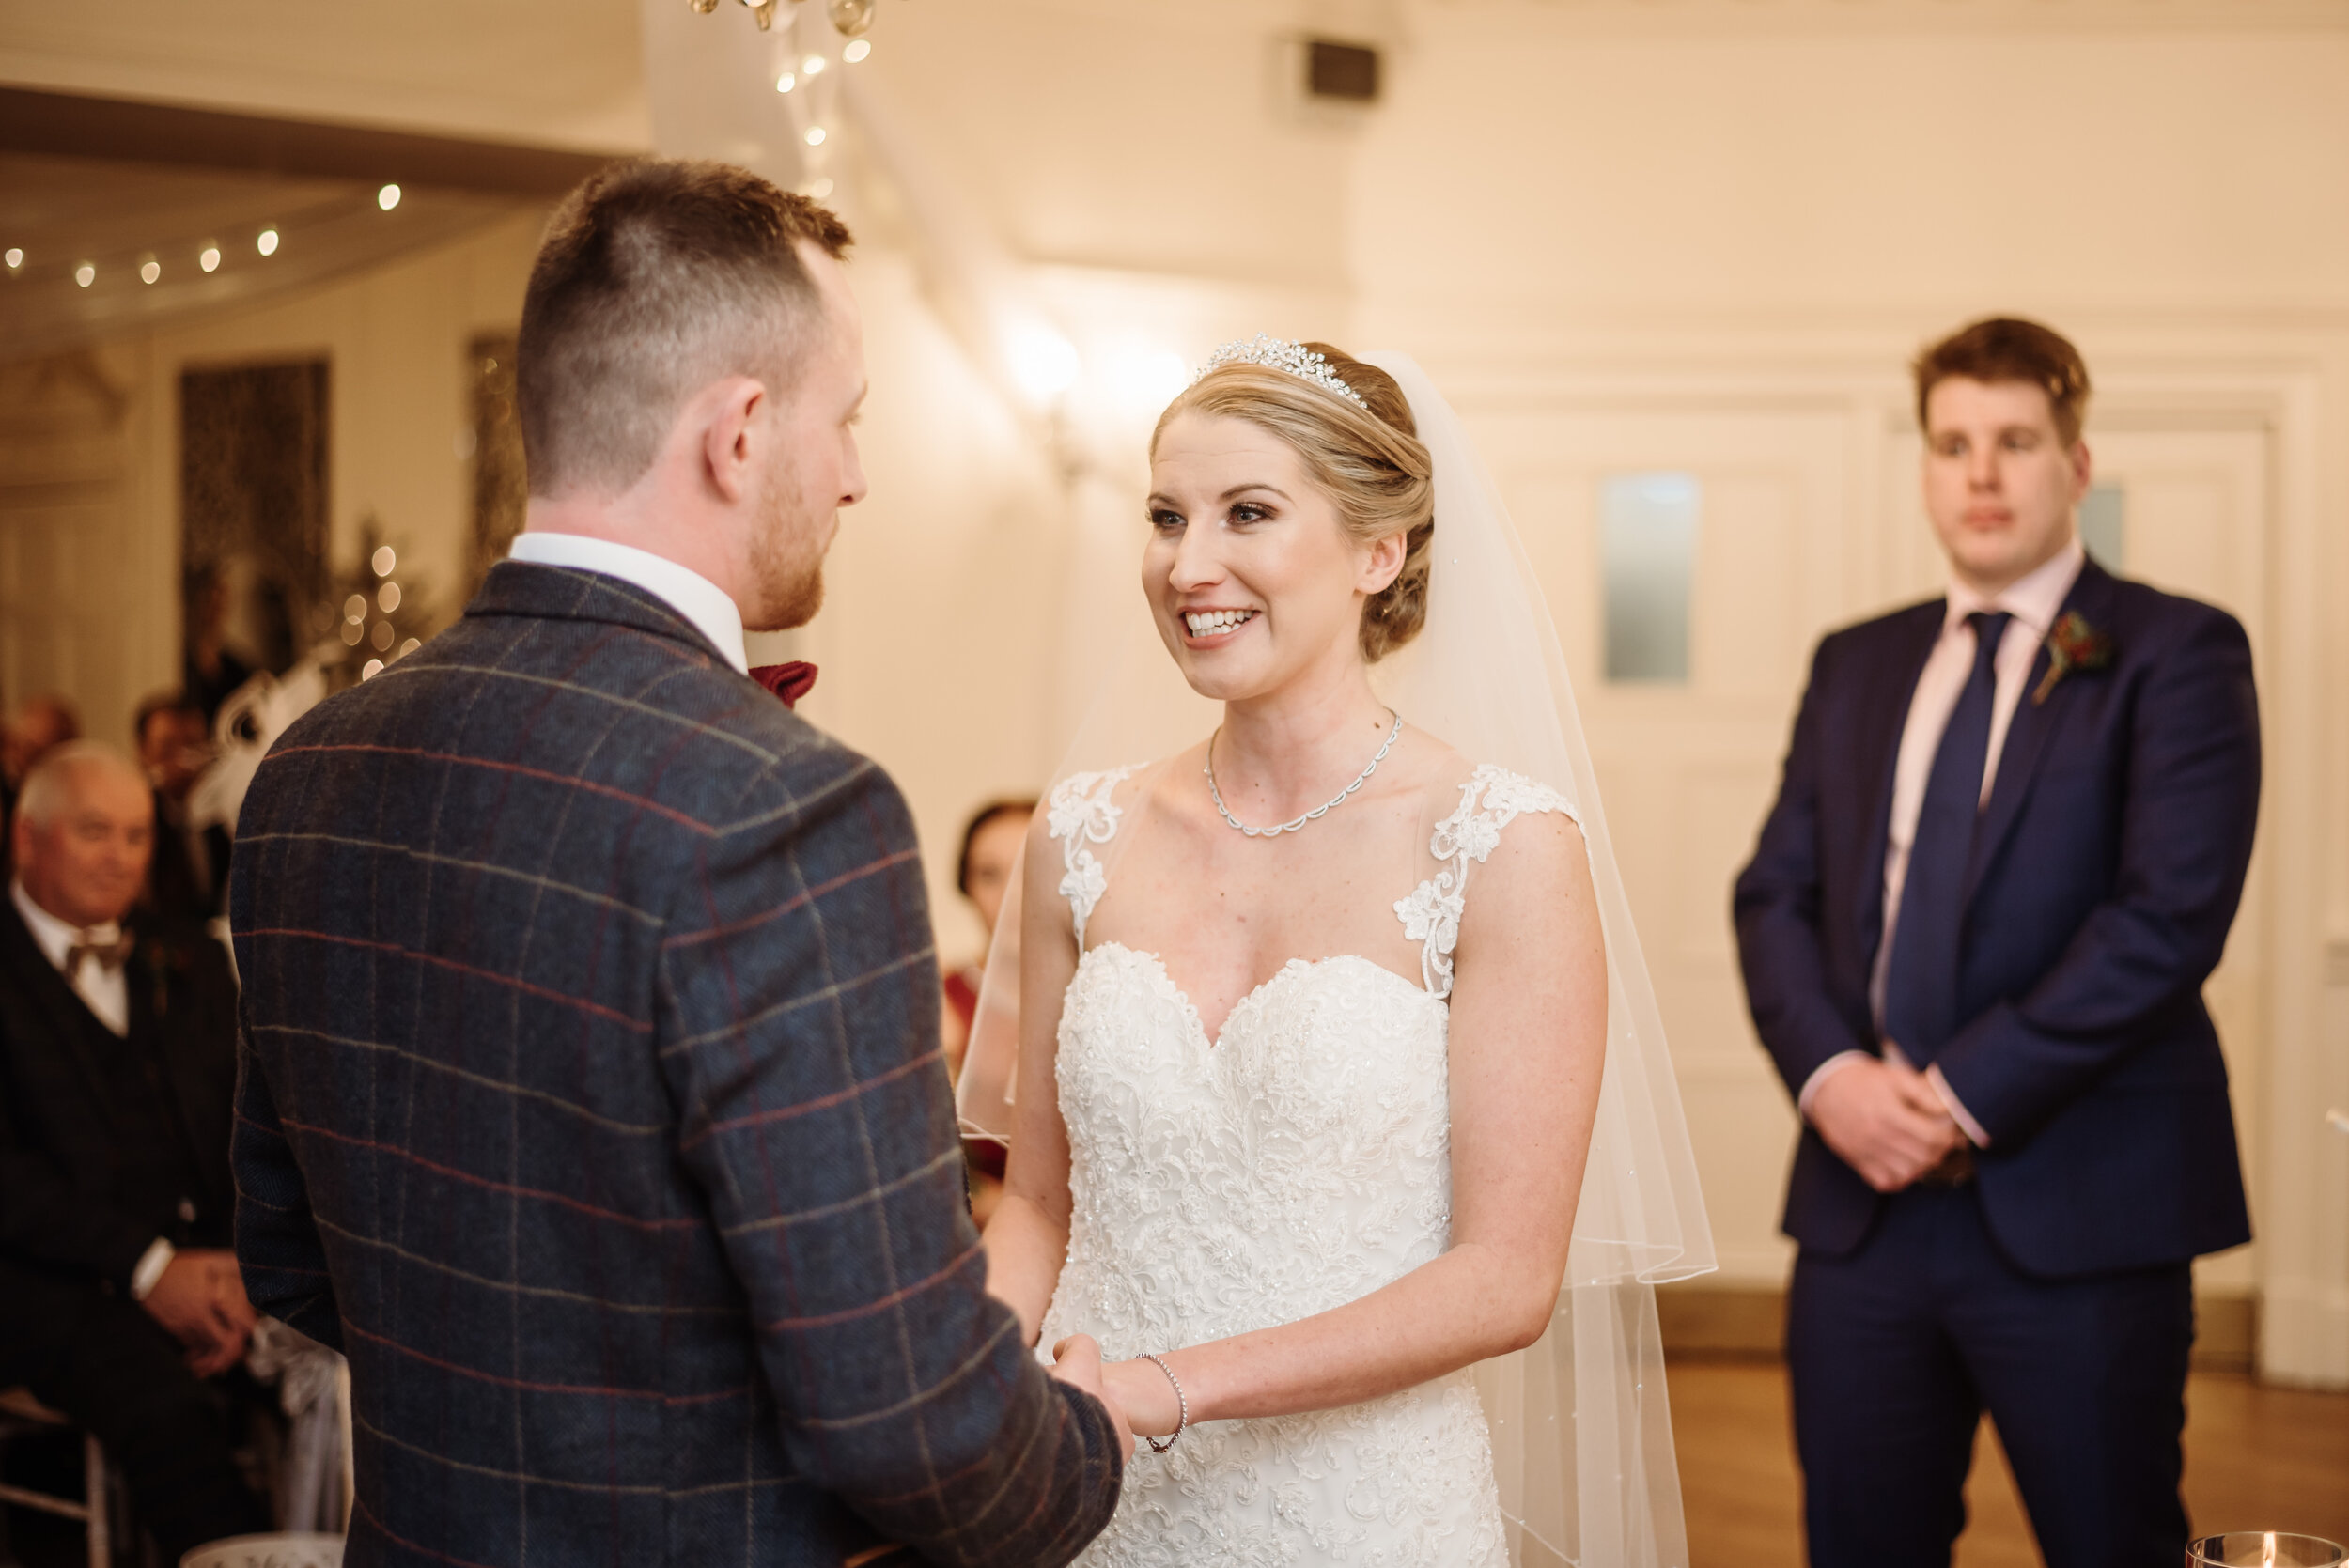 Civil ceremony at Eaves Hall